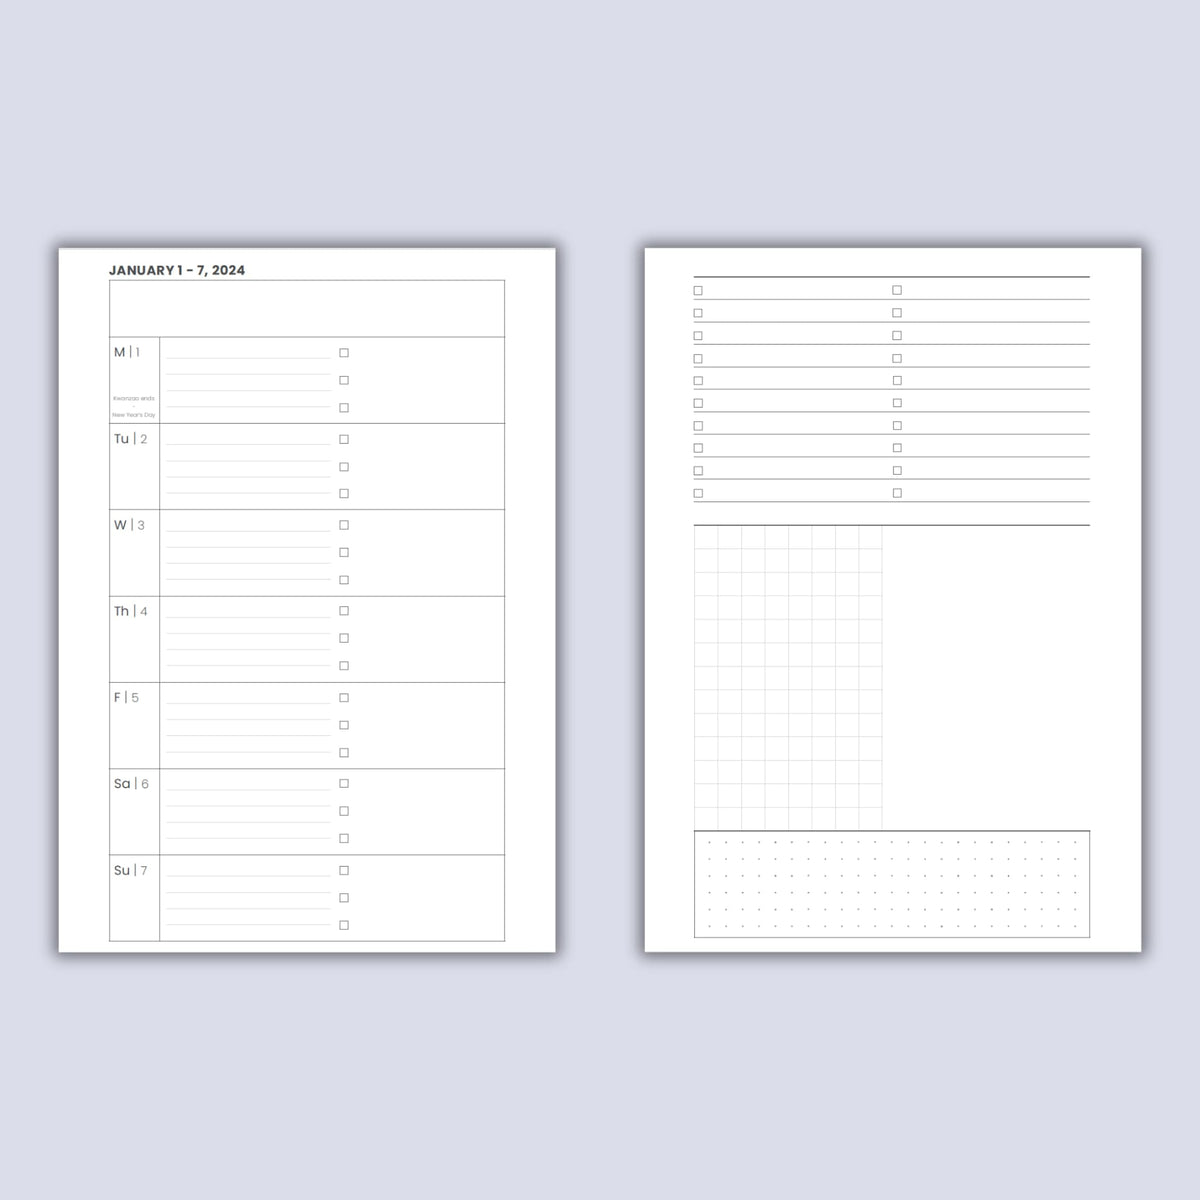 2024 Weekly Planner Inserts